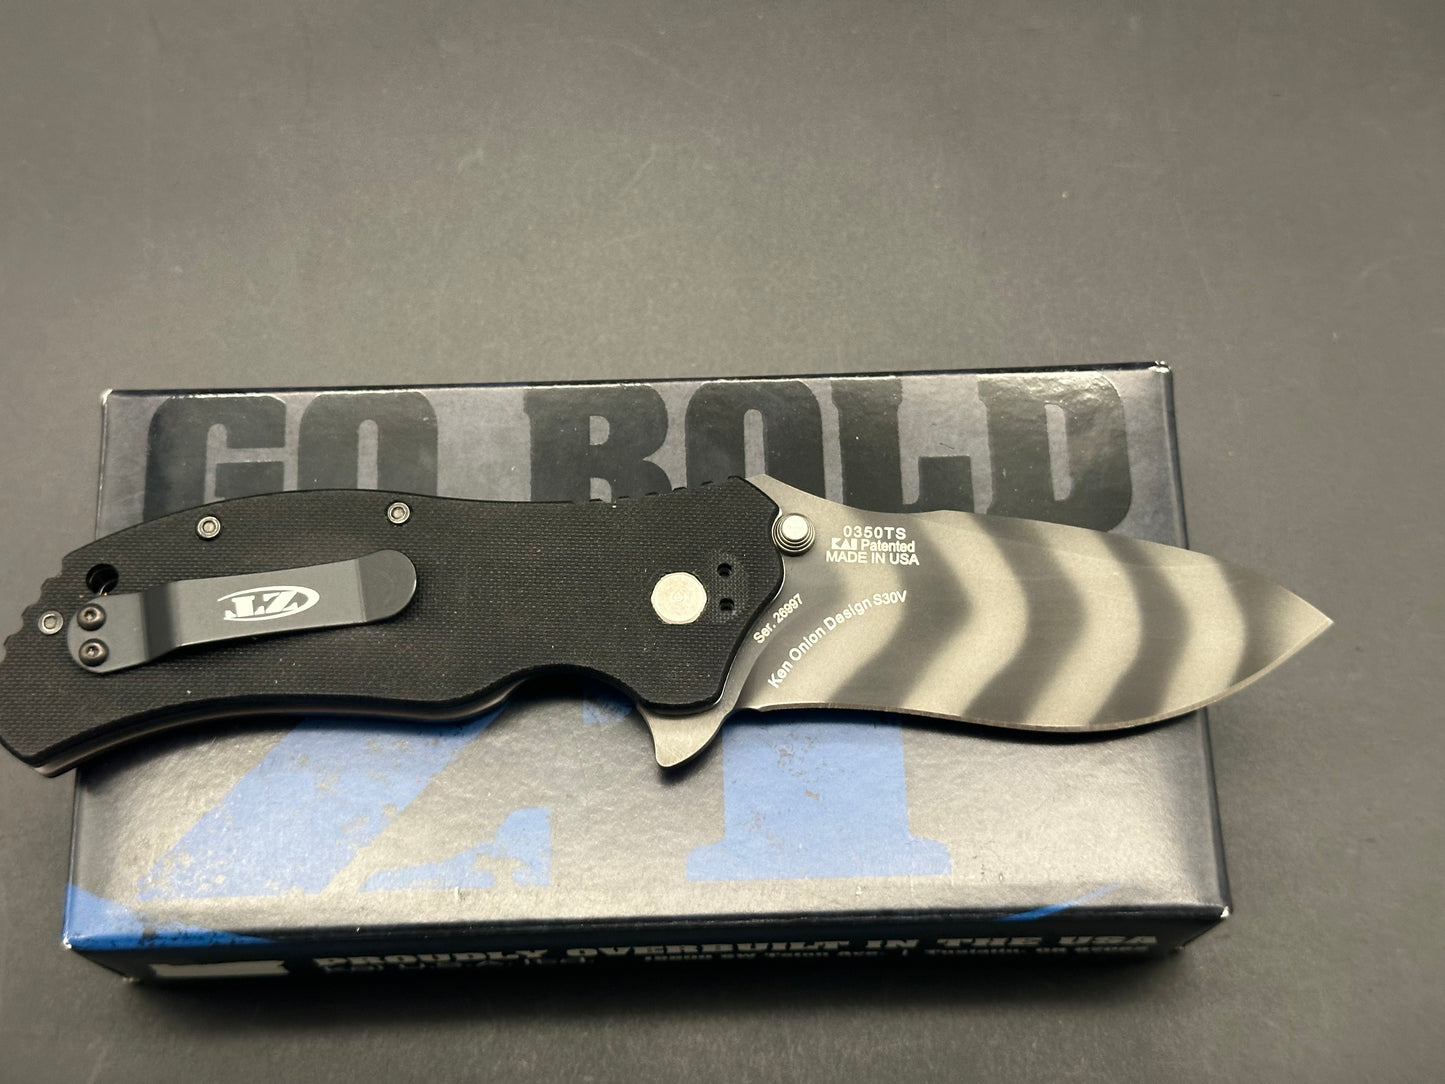 Zero Tolerance 0350TS Assisted Opening Knife (3.25" Tiger Stripe)